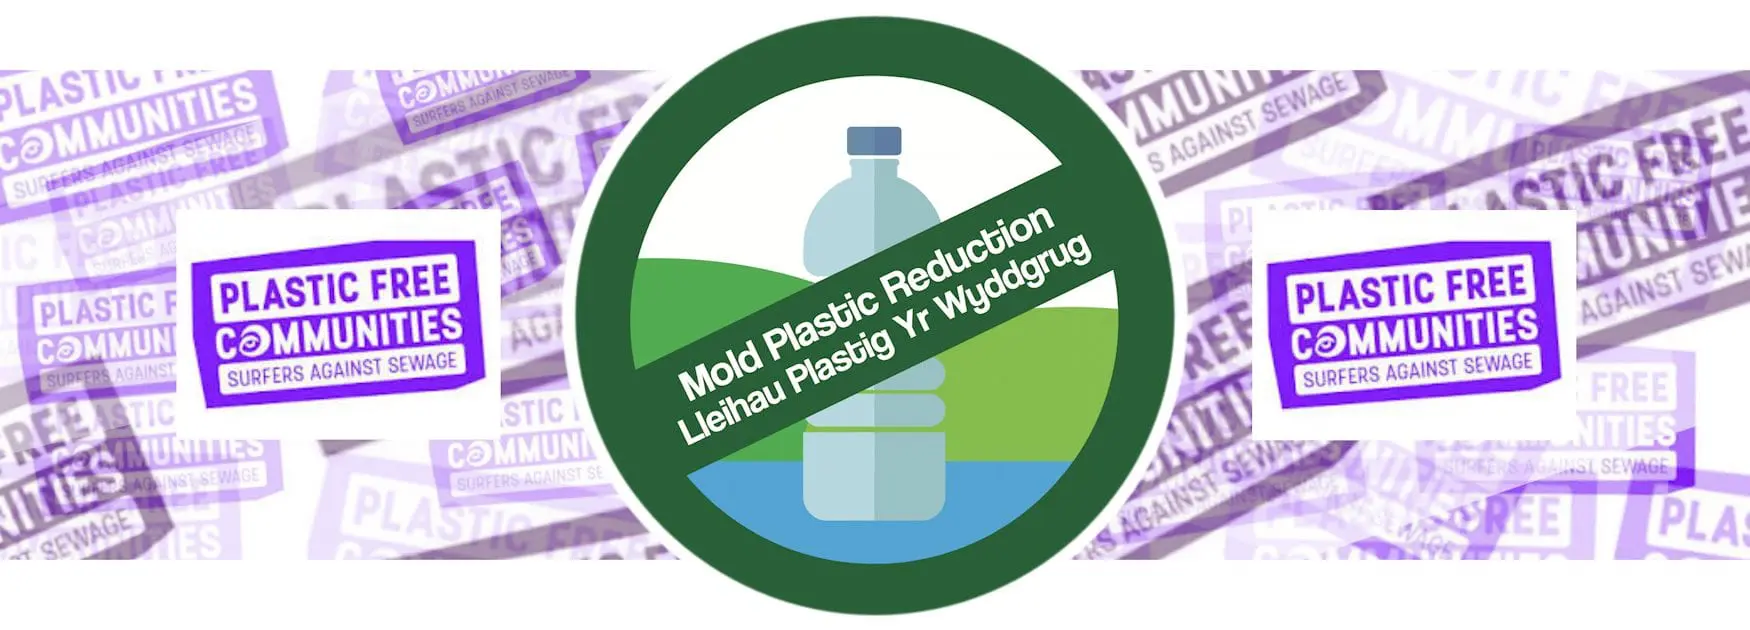 Header image for Plastic Free Communities page showing Surfers Against Sewage promotional logo